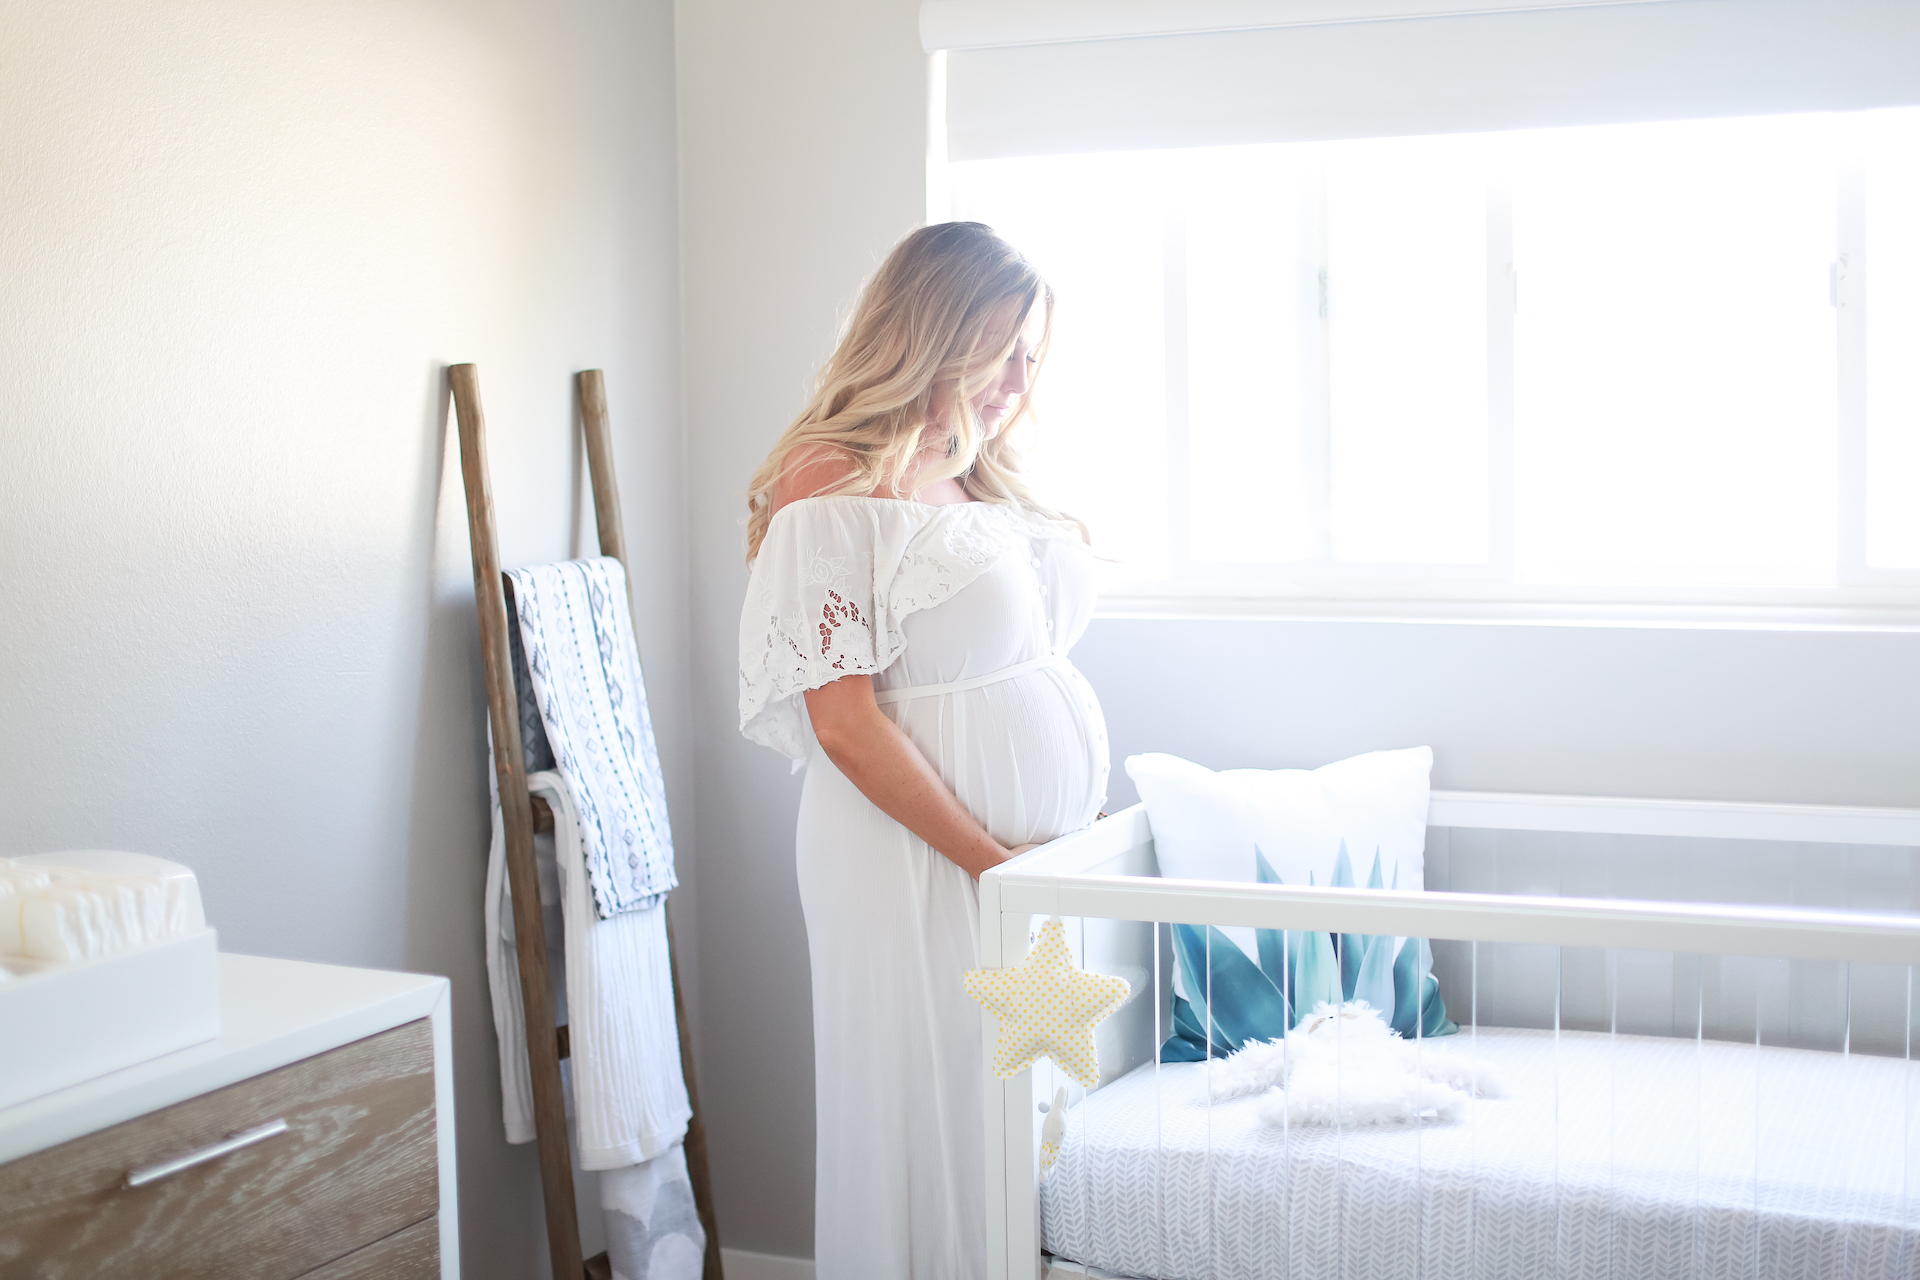 Begin bonding with your baby conceived through egg donation during pregnancy. Find tips for nurturing a deep bond with donor egg baby in this blog by a DEIVF mother!